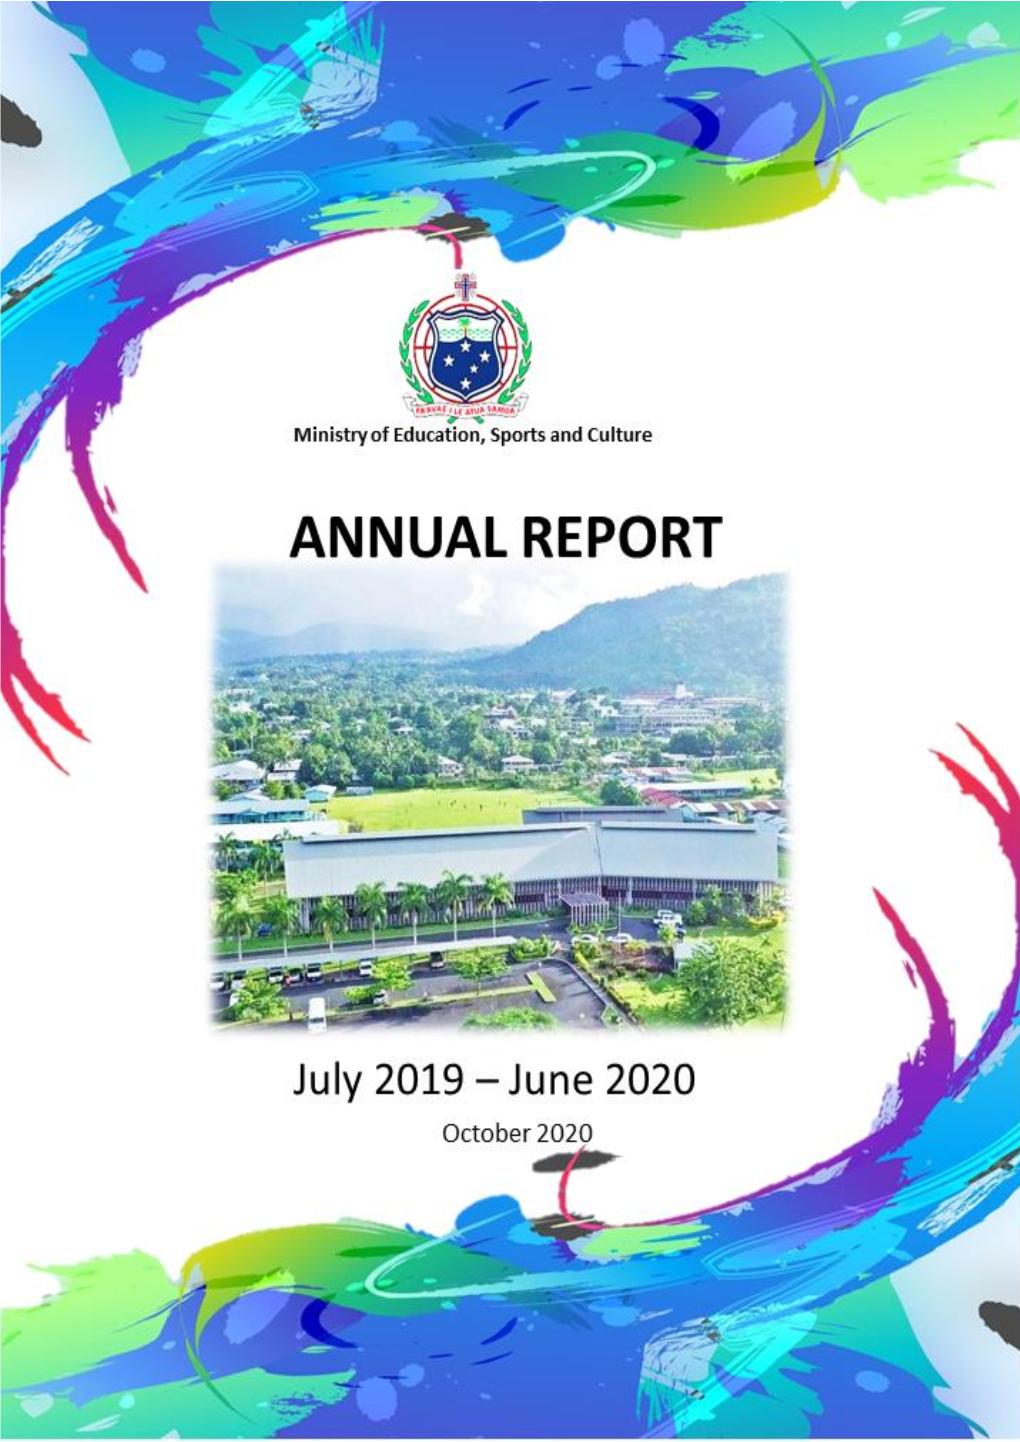 Annual Report of the Ministry of Education, Sports and Culture